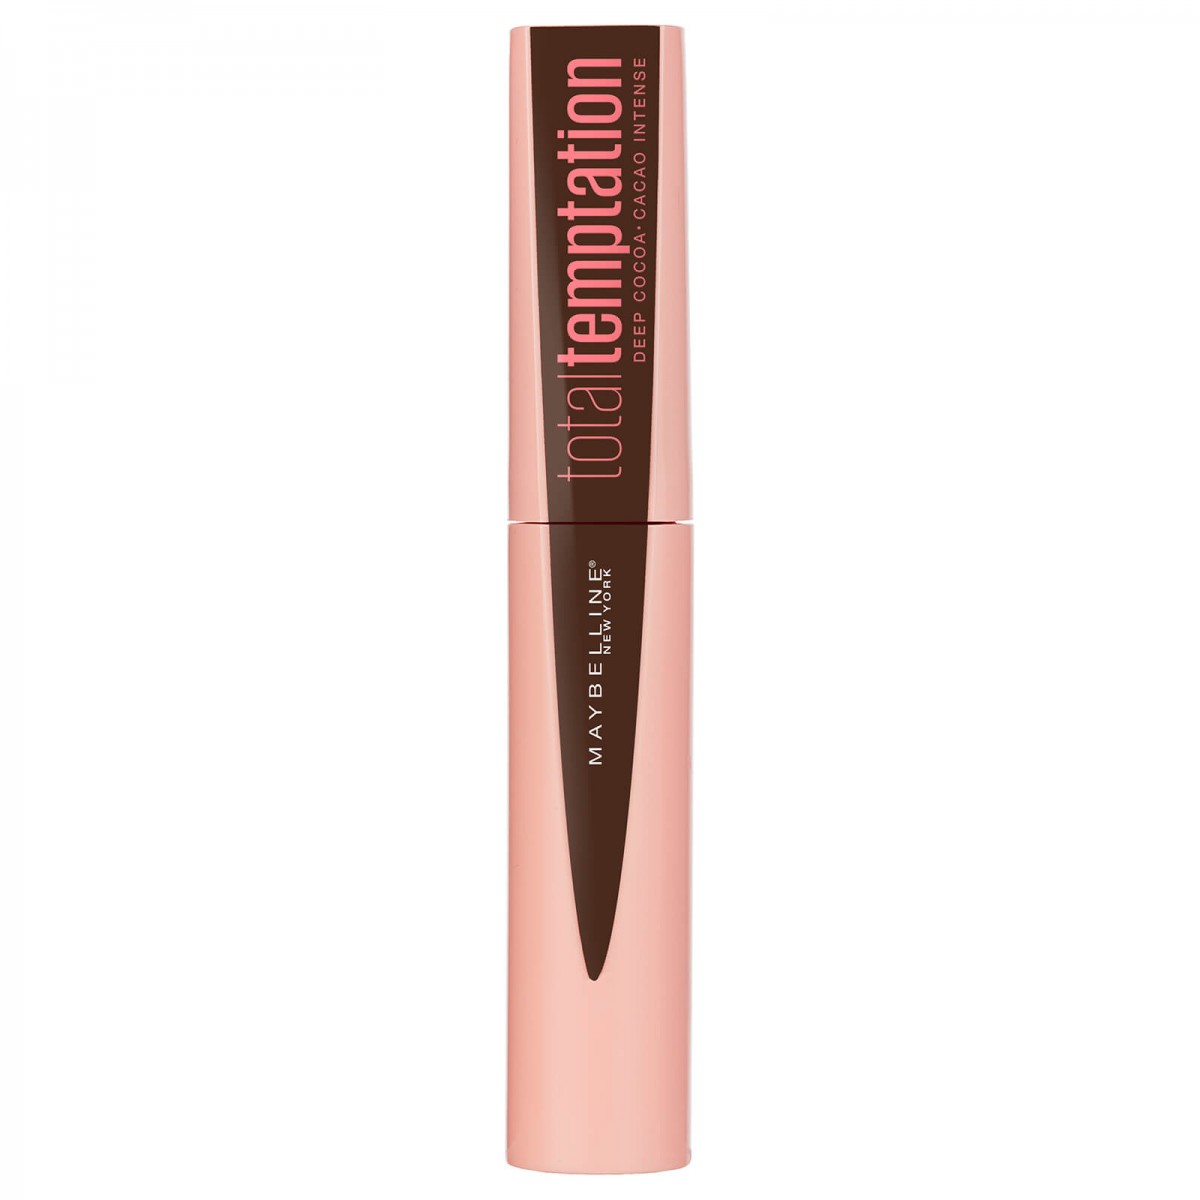 Maybelline Total Temptation Mascara - Cocoa Brown 8.6ml